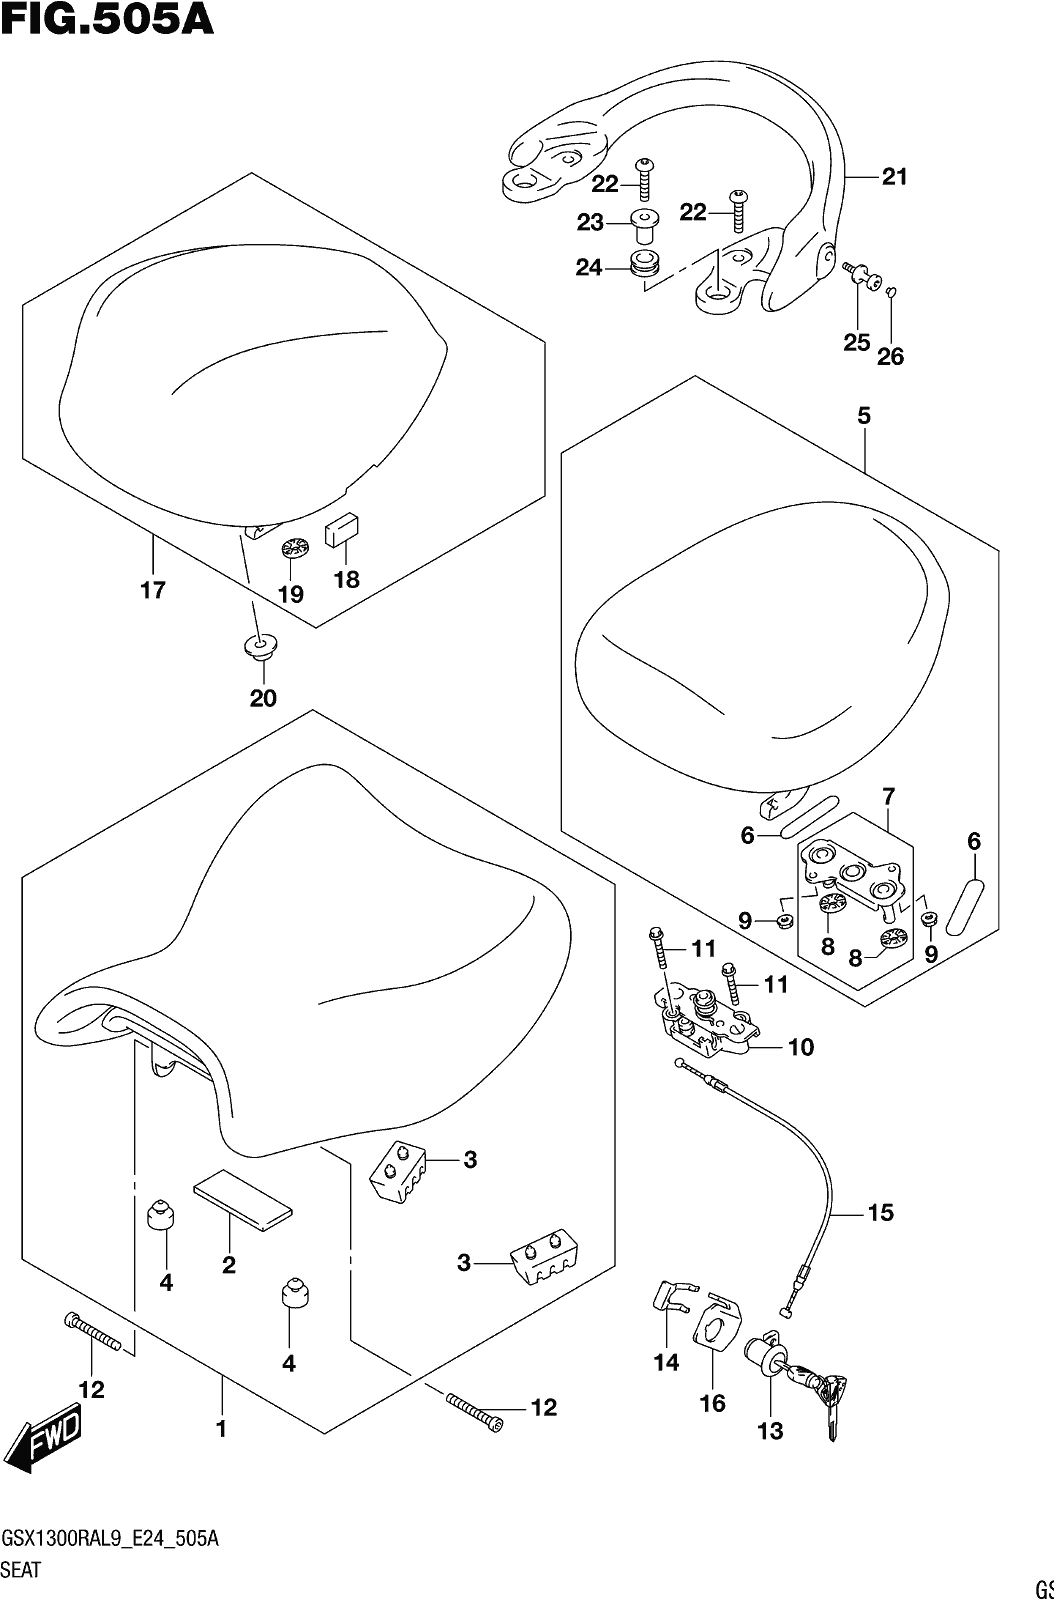 Fig.505a Seat